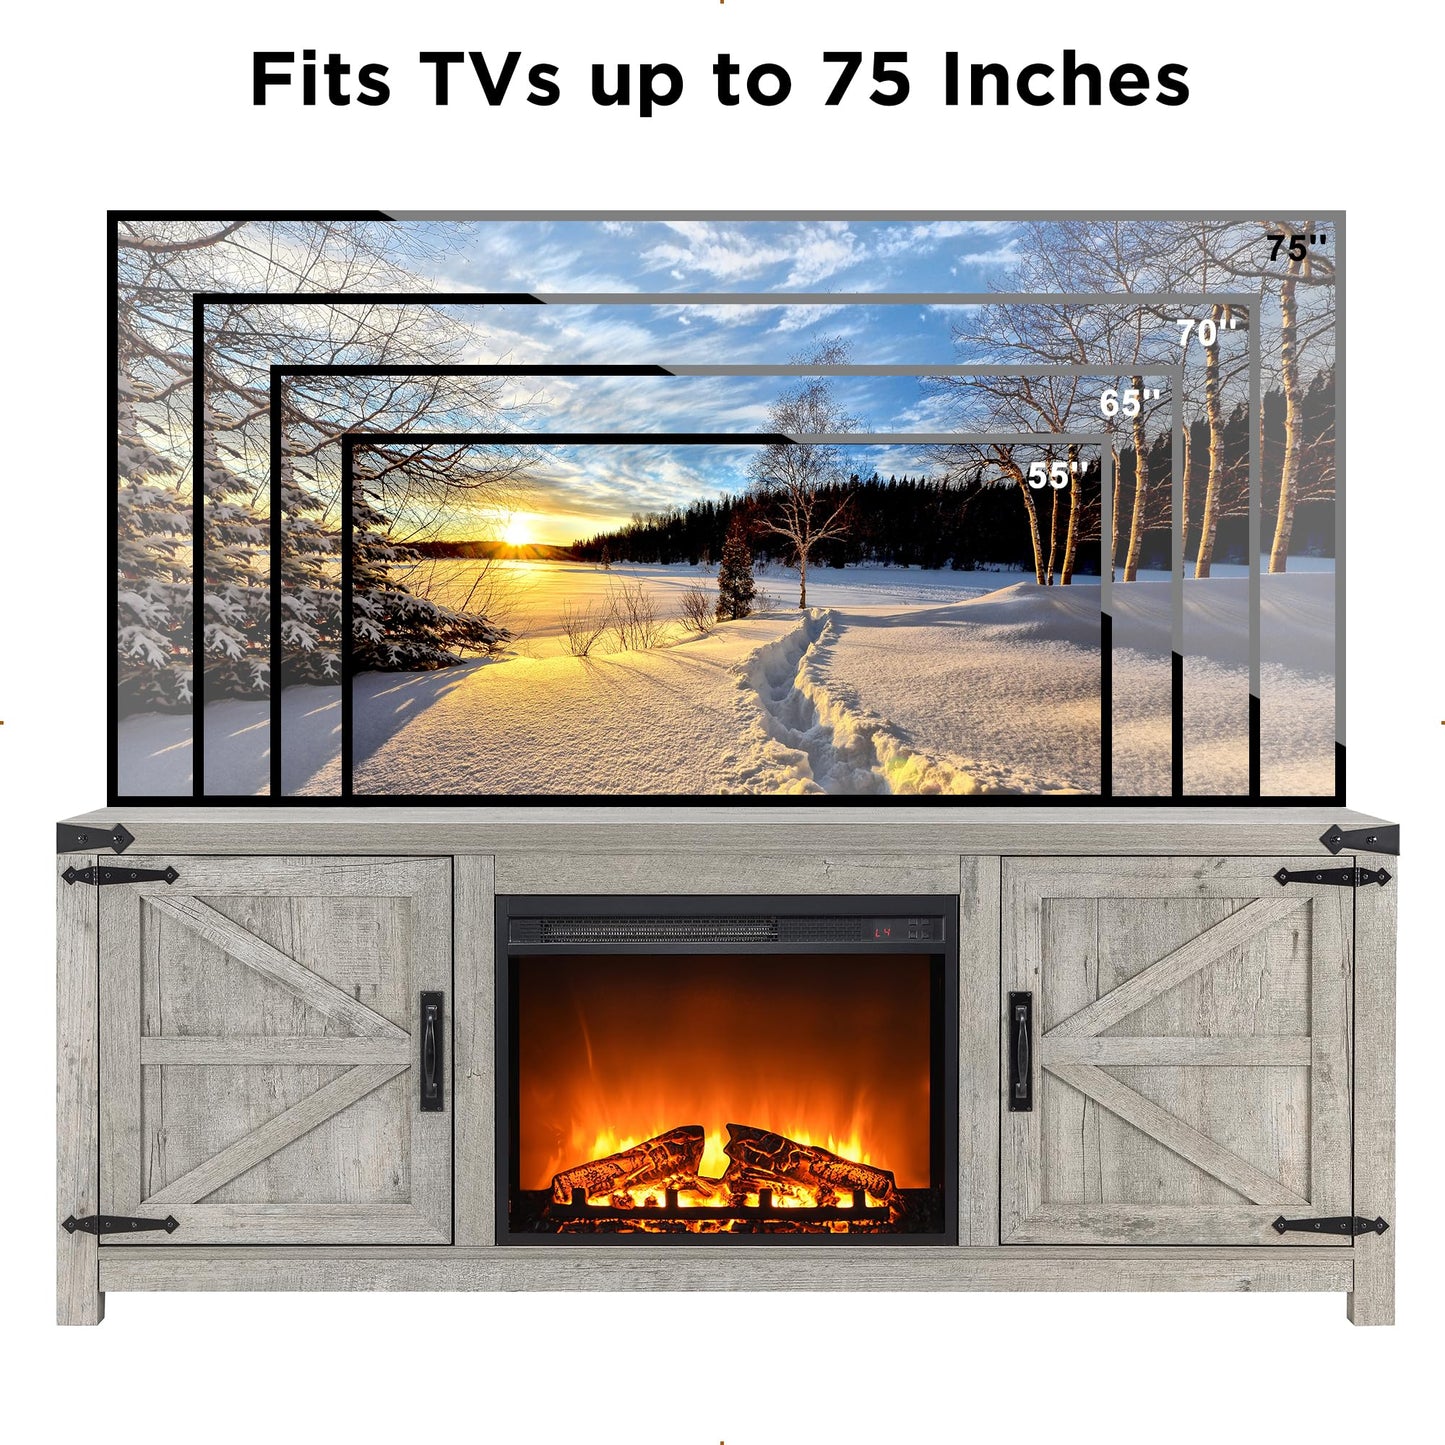 T4TREAM Fireplace TV Stand for 75 Inch TV, Farmhouse Barn Door Media Console, Entertainment Center with 23" Electric Fireplace Remote Control,for Living Room, 66 Inch, Light Rustic Oak